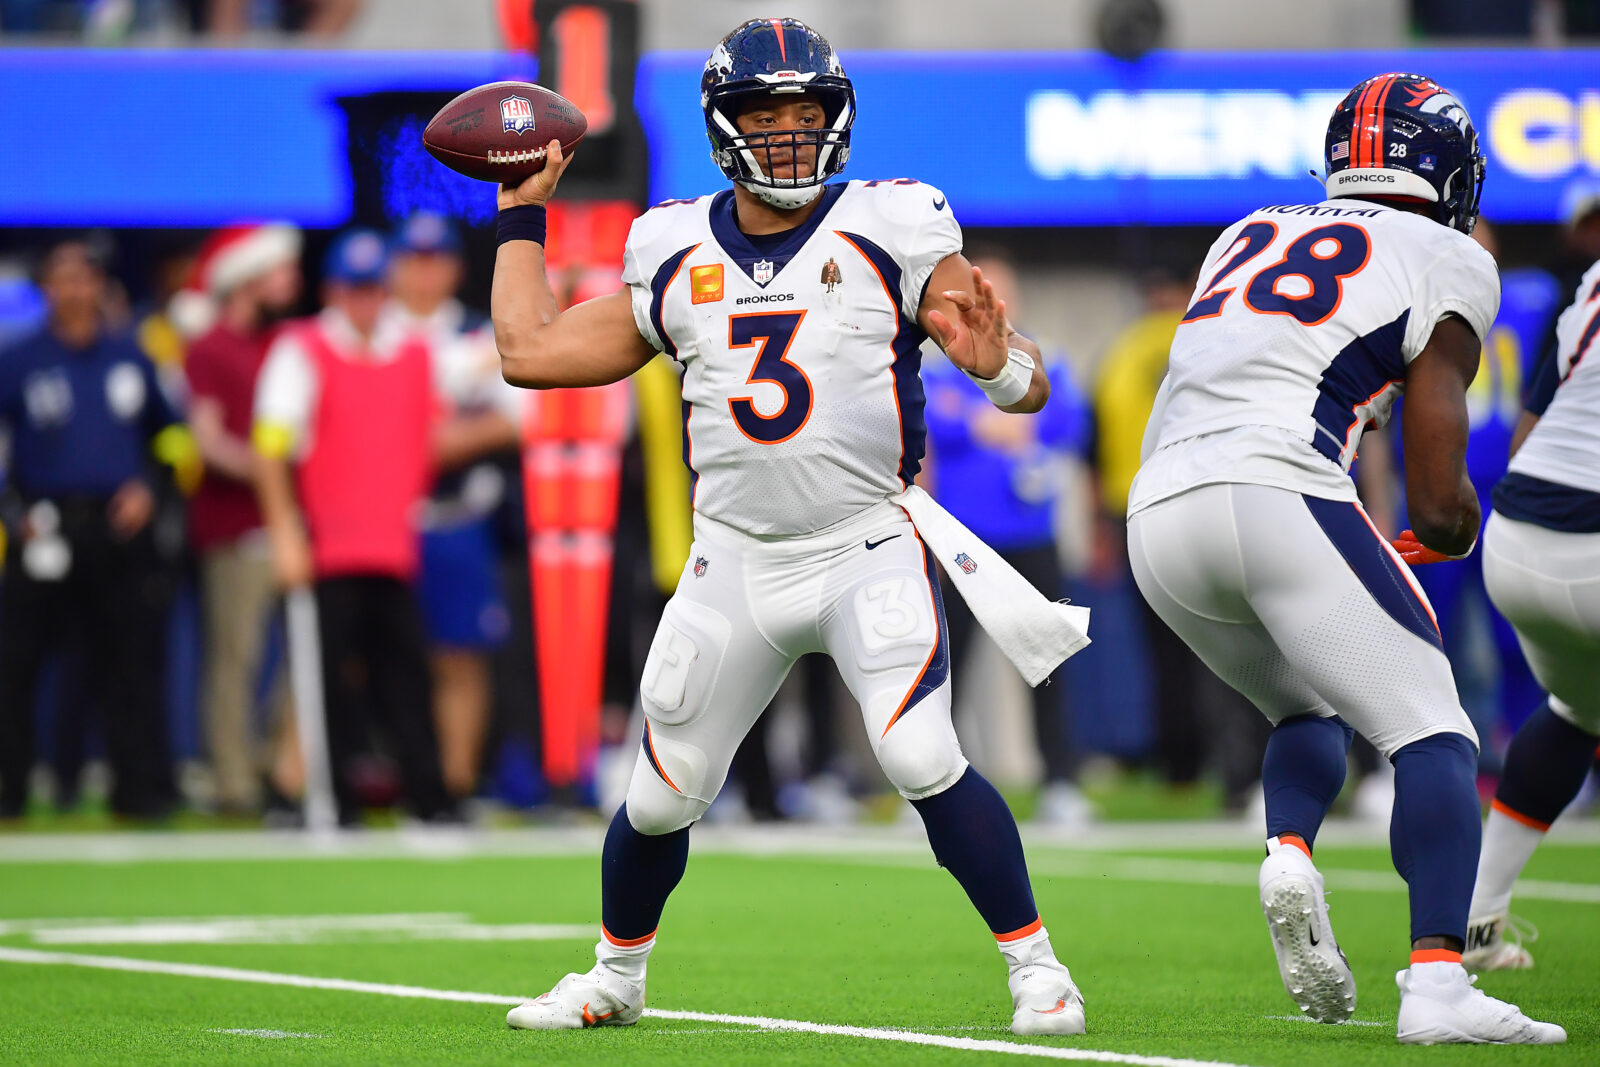 Broncos at Rams on December 25, 2022: Tickets, matchup info and more